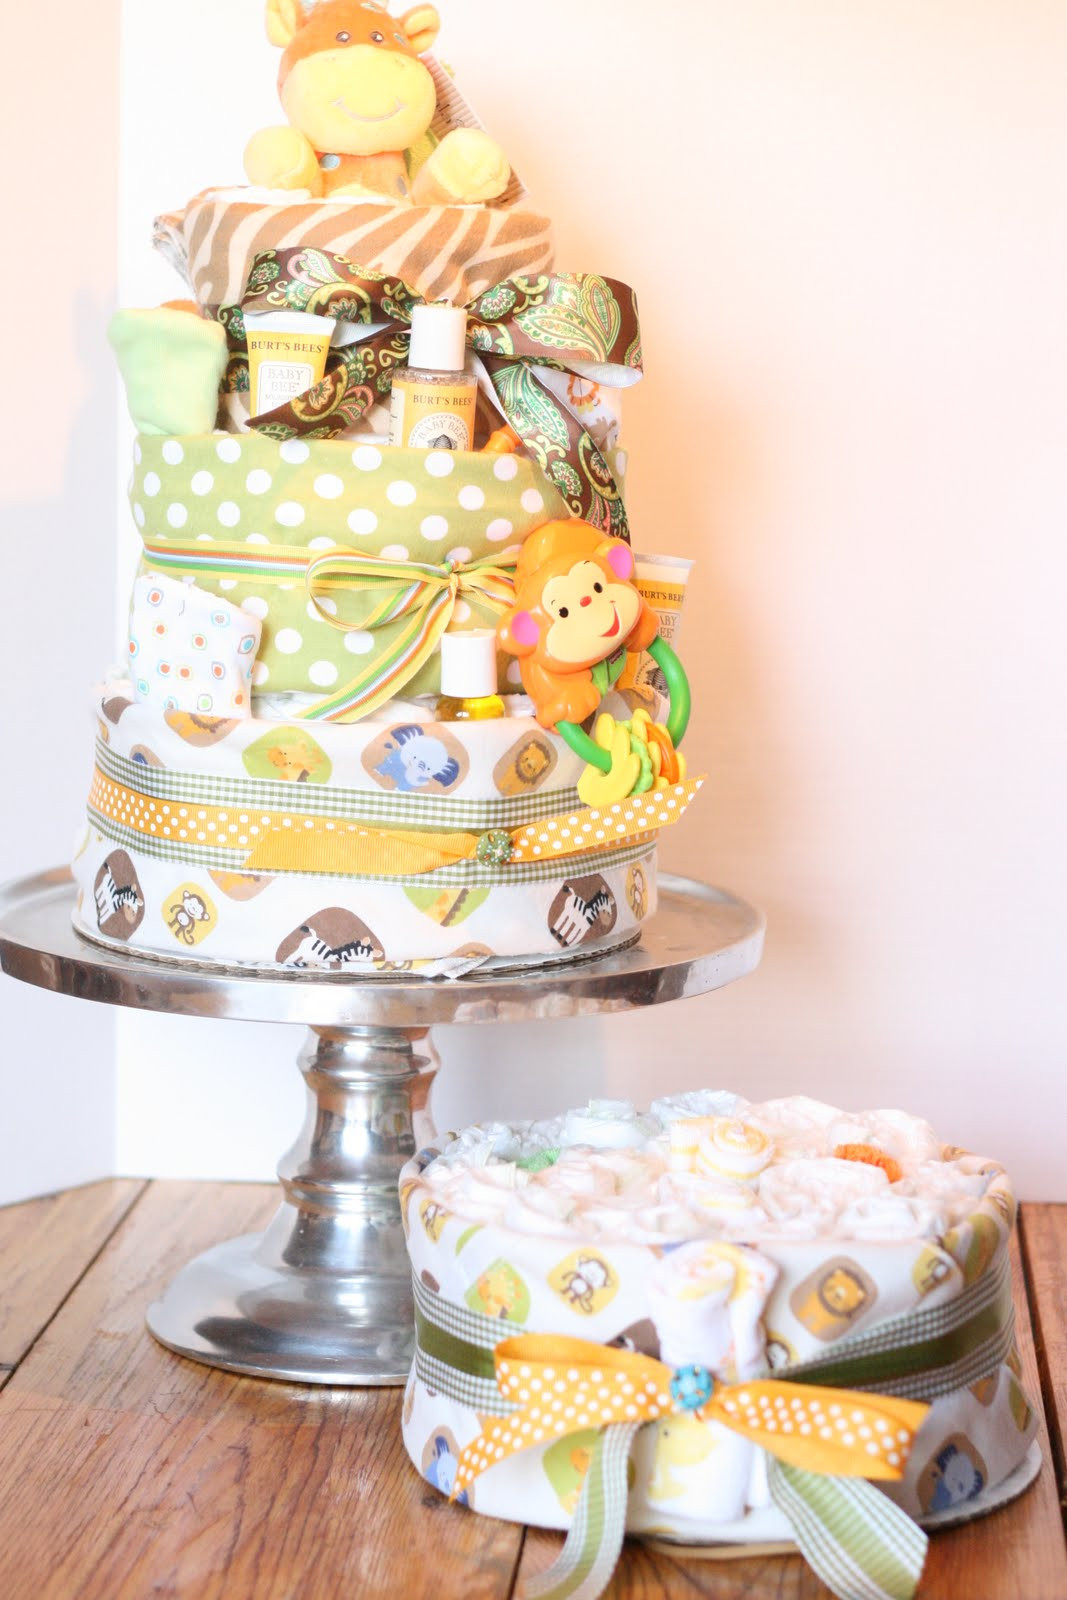 DIY Baby Ideas
 25 DIY Baby Shower Gifts for the Little Boy on the Wa